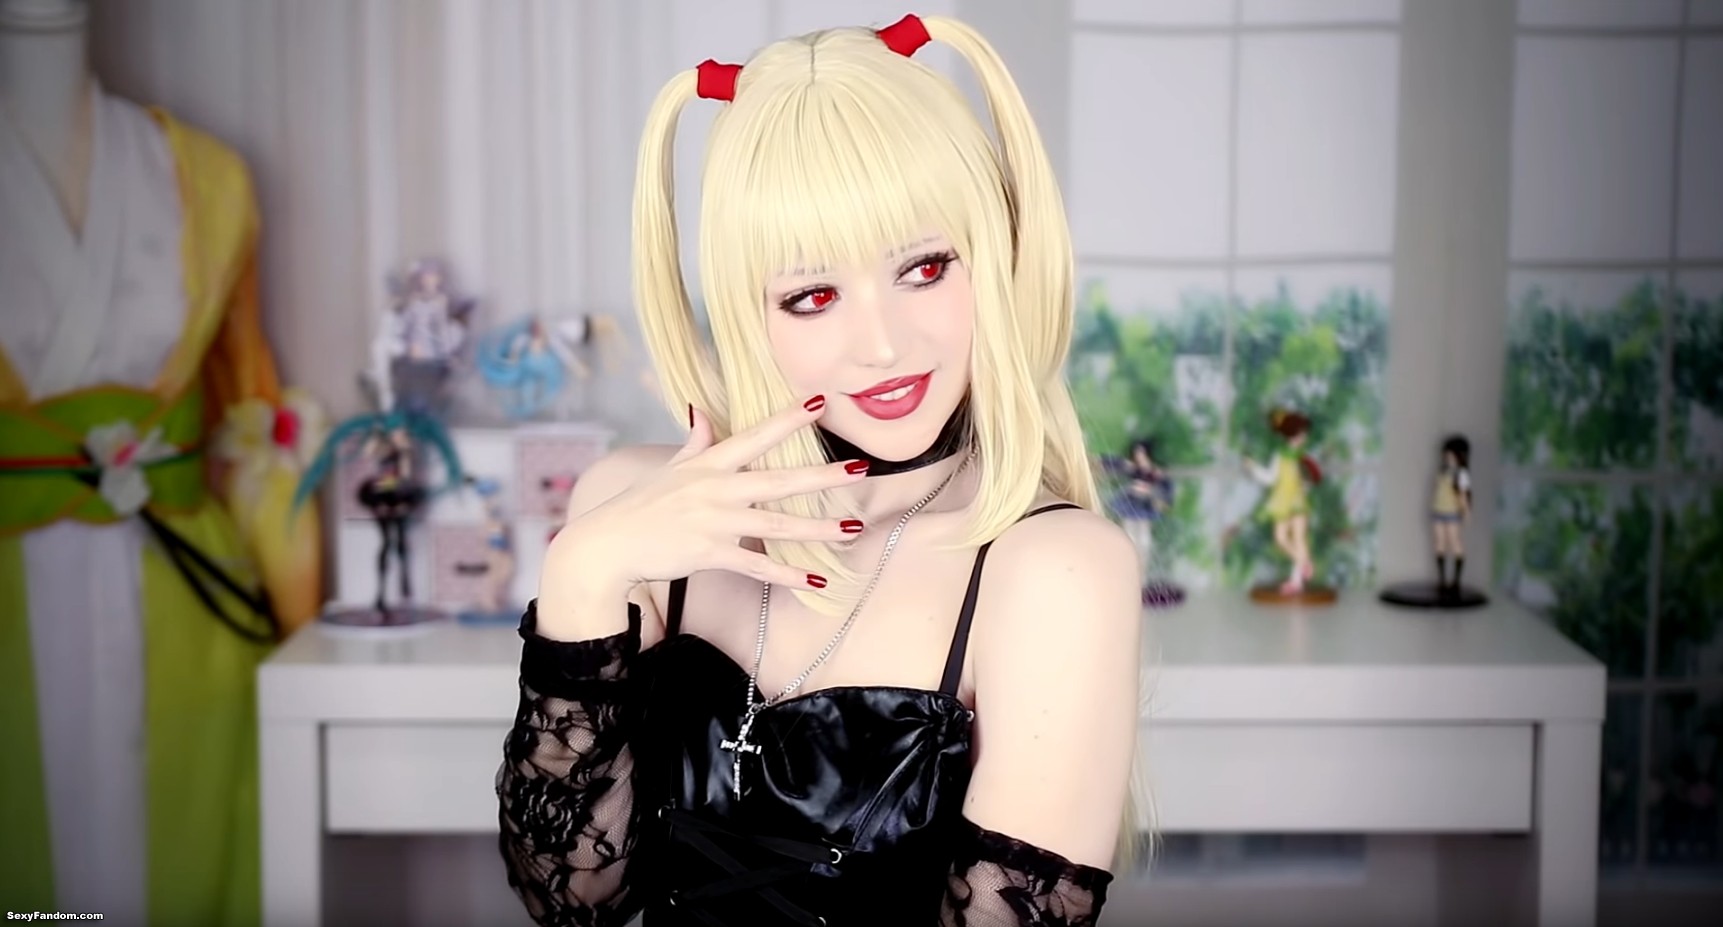 This Misa Amane Cosplay Makeup Will Have You Taking Names